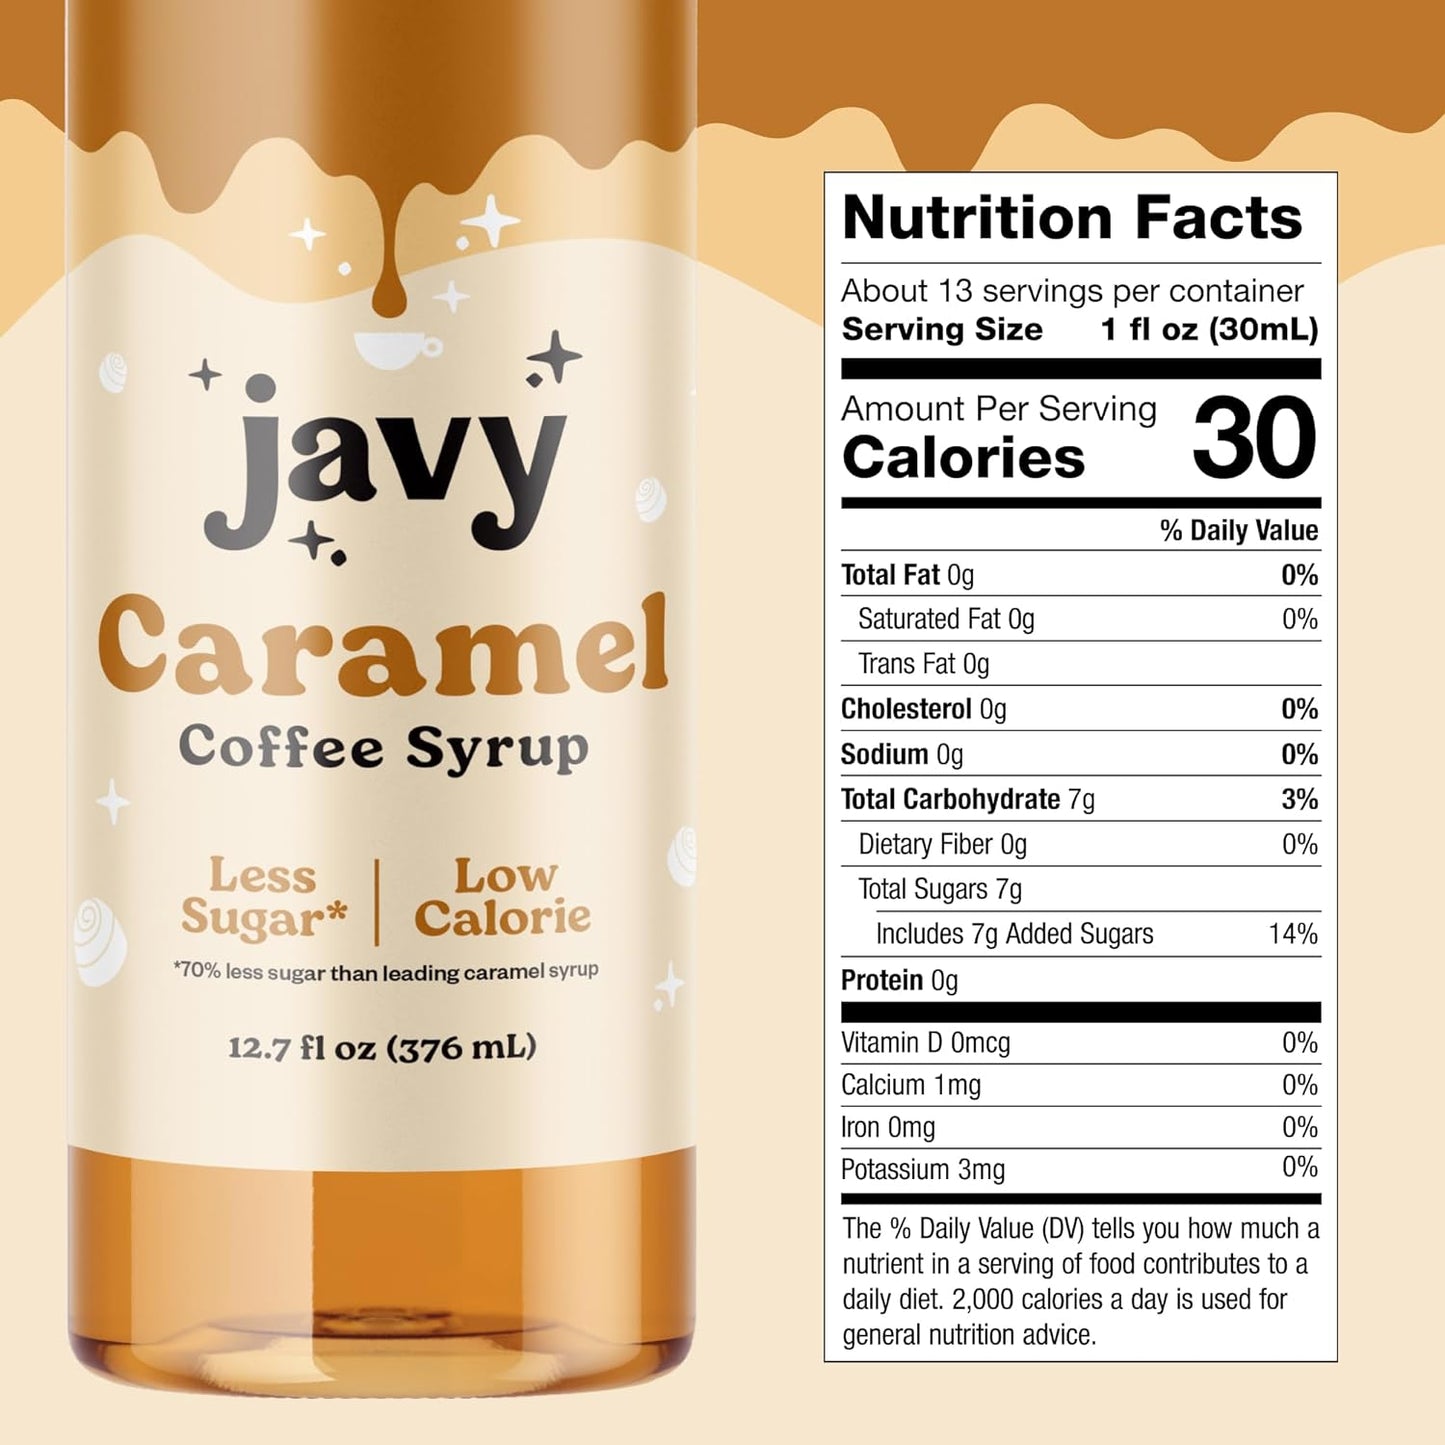 Javy Premium Caramel Coffee Syrup, Low Sugar - Low Calorie, Coffee Flavoring Syrup, Coffee Bar Accessories. Great for Flavoring All Types of Drinks